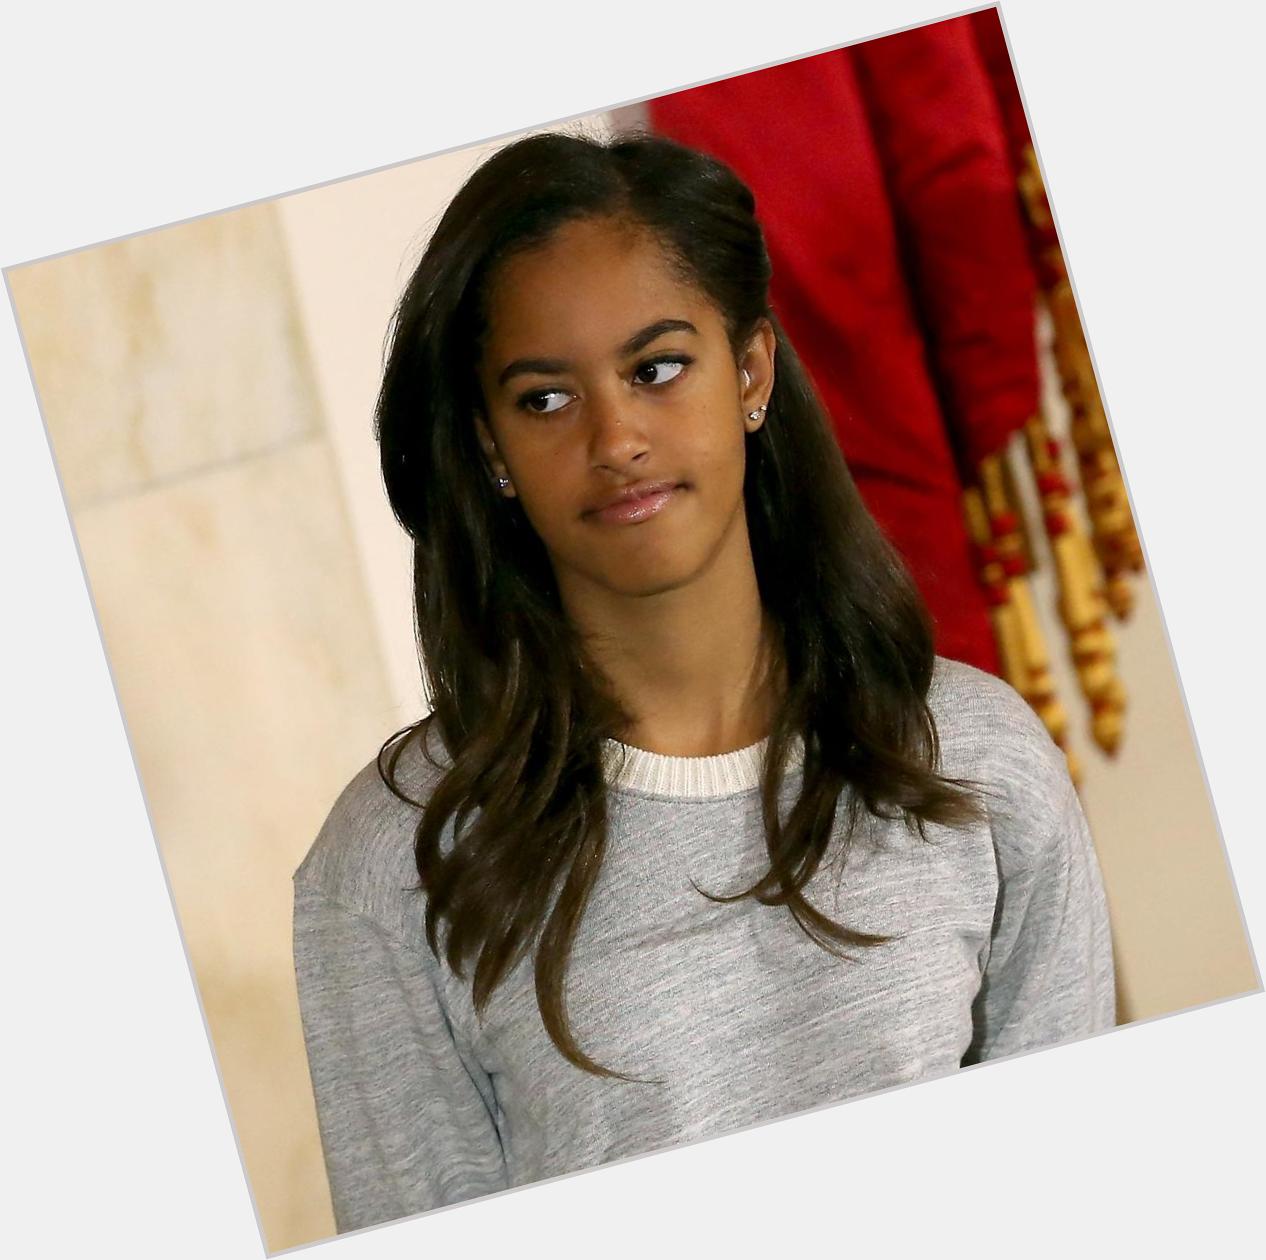 Happy Birthday to 1st Daughter Malia Obama who turns 17 years old today. 